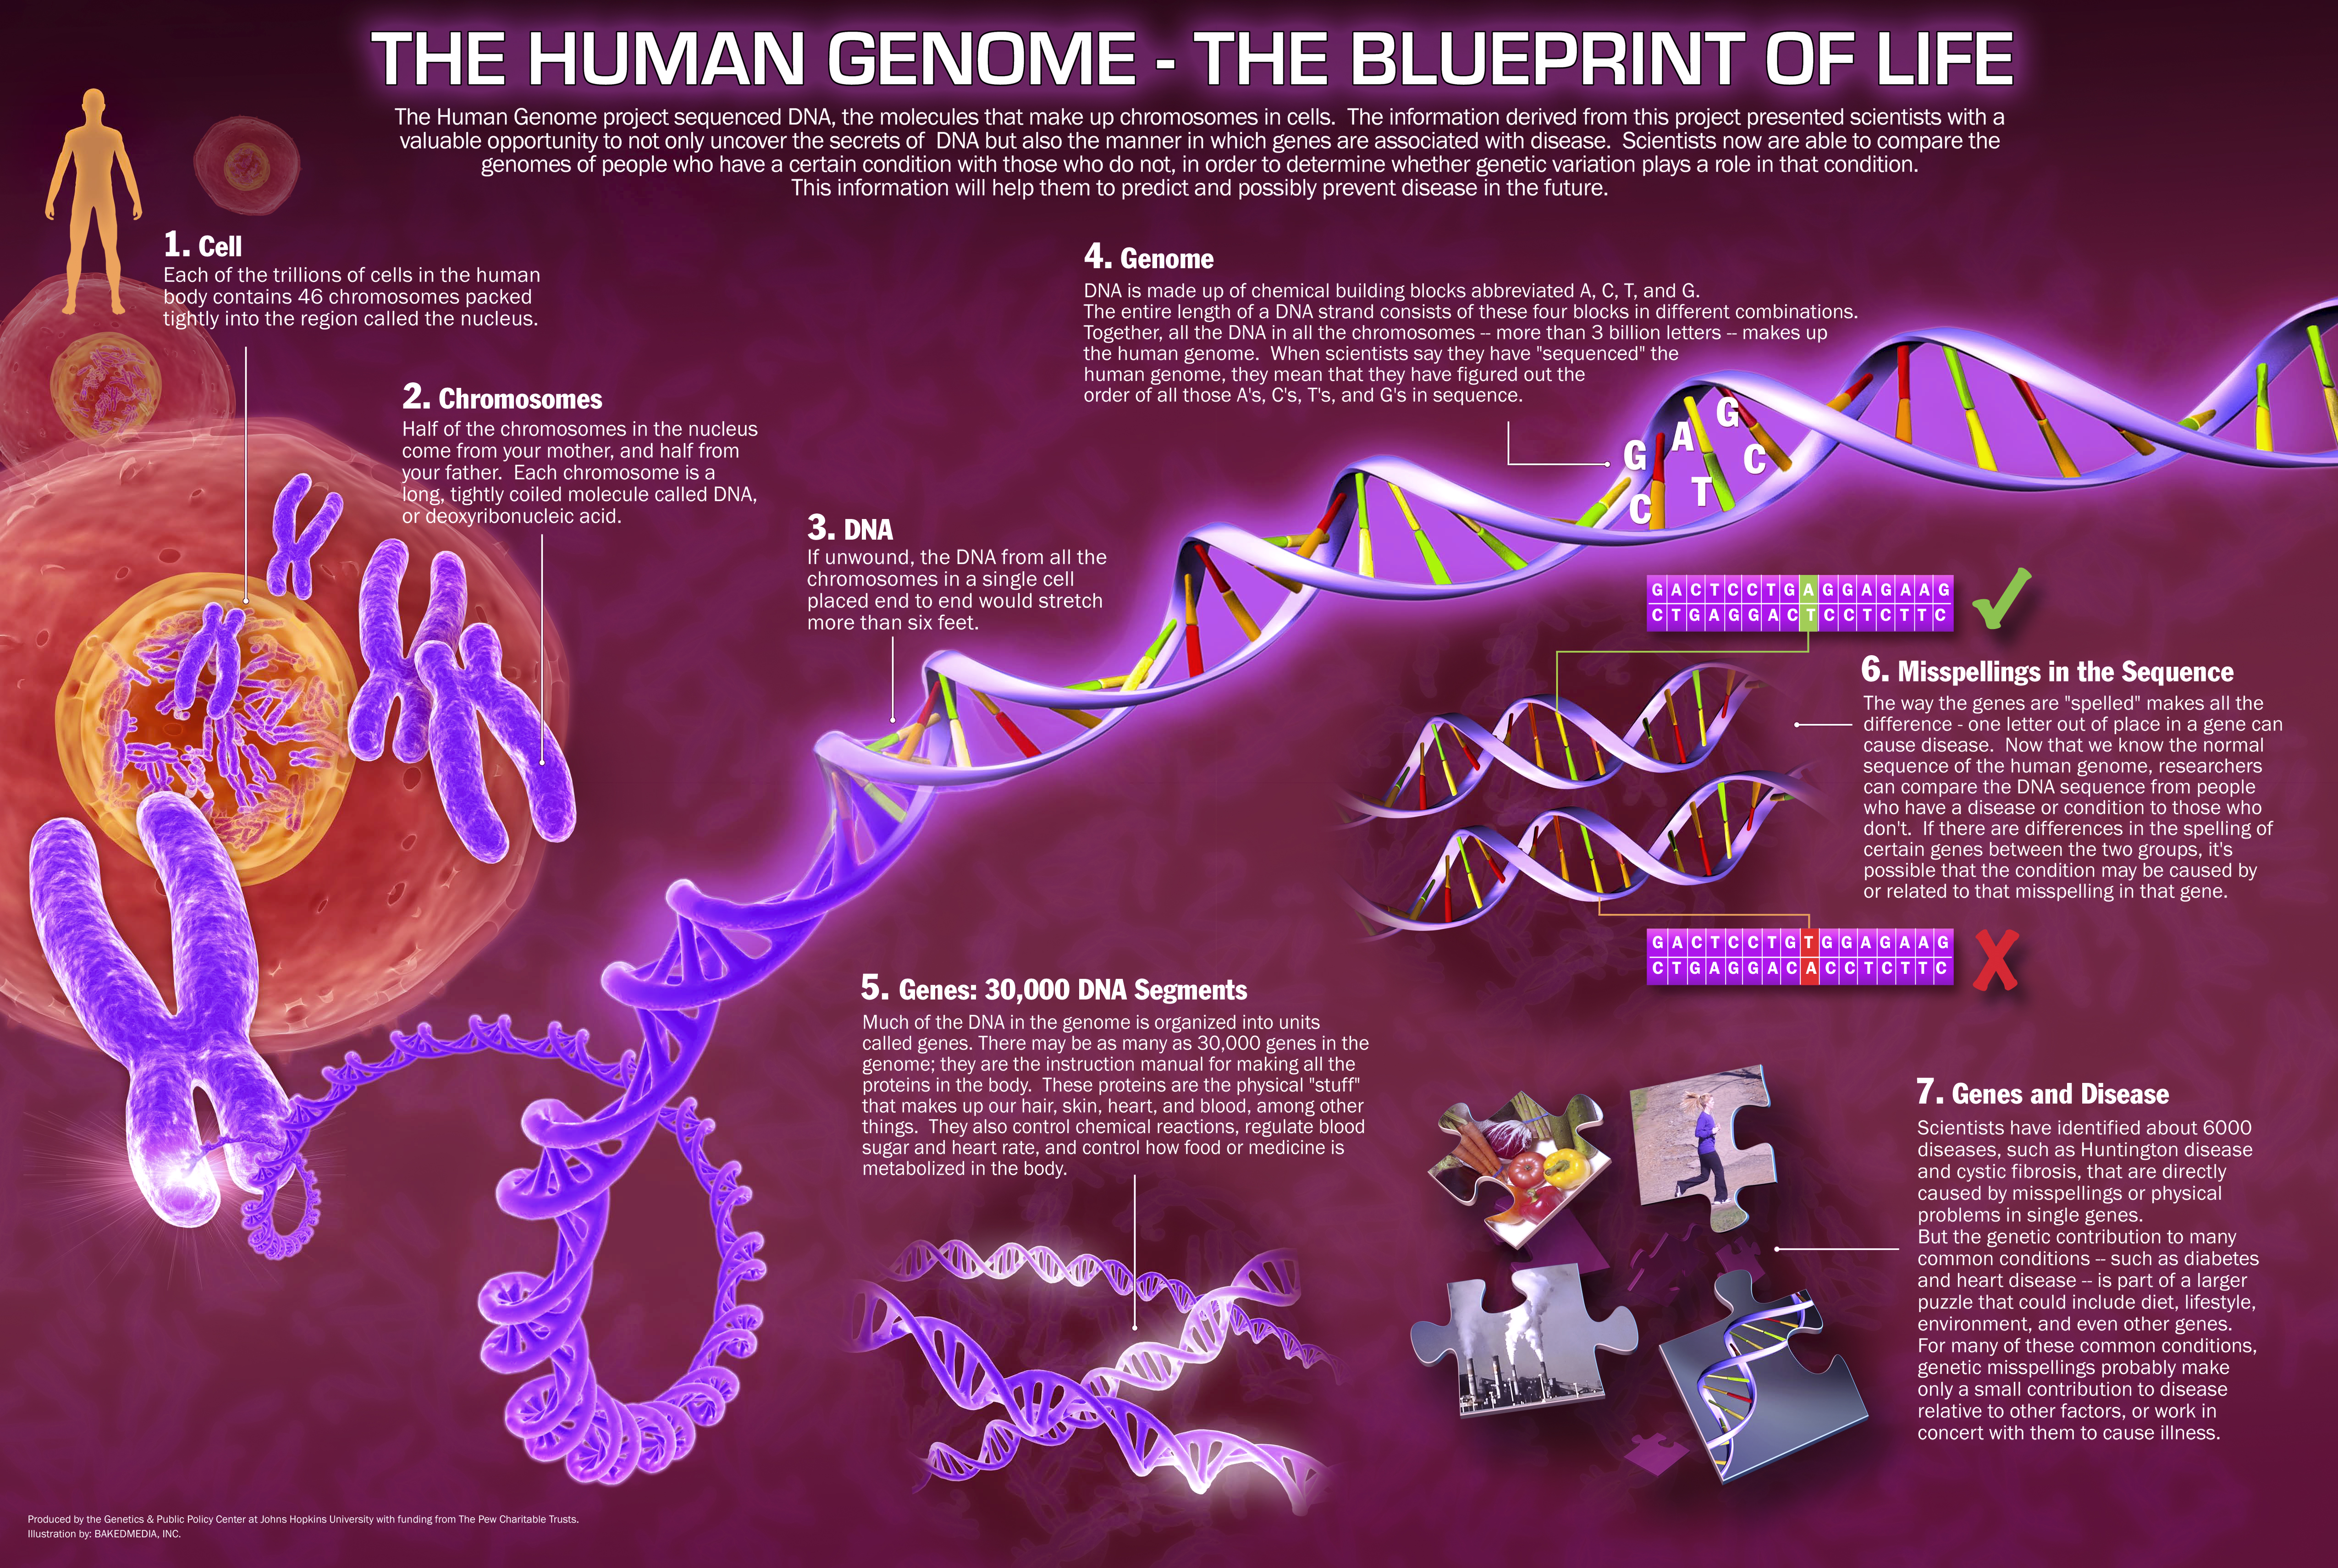 The Human Genome. Source: http://www.infohow.org/wp-content/uploads/2012/11/The-Human-Genome.jpg